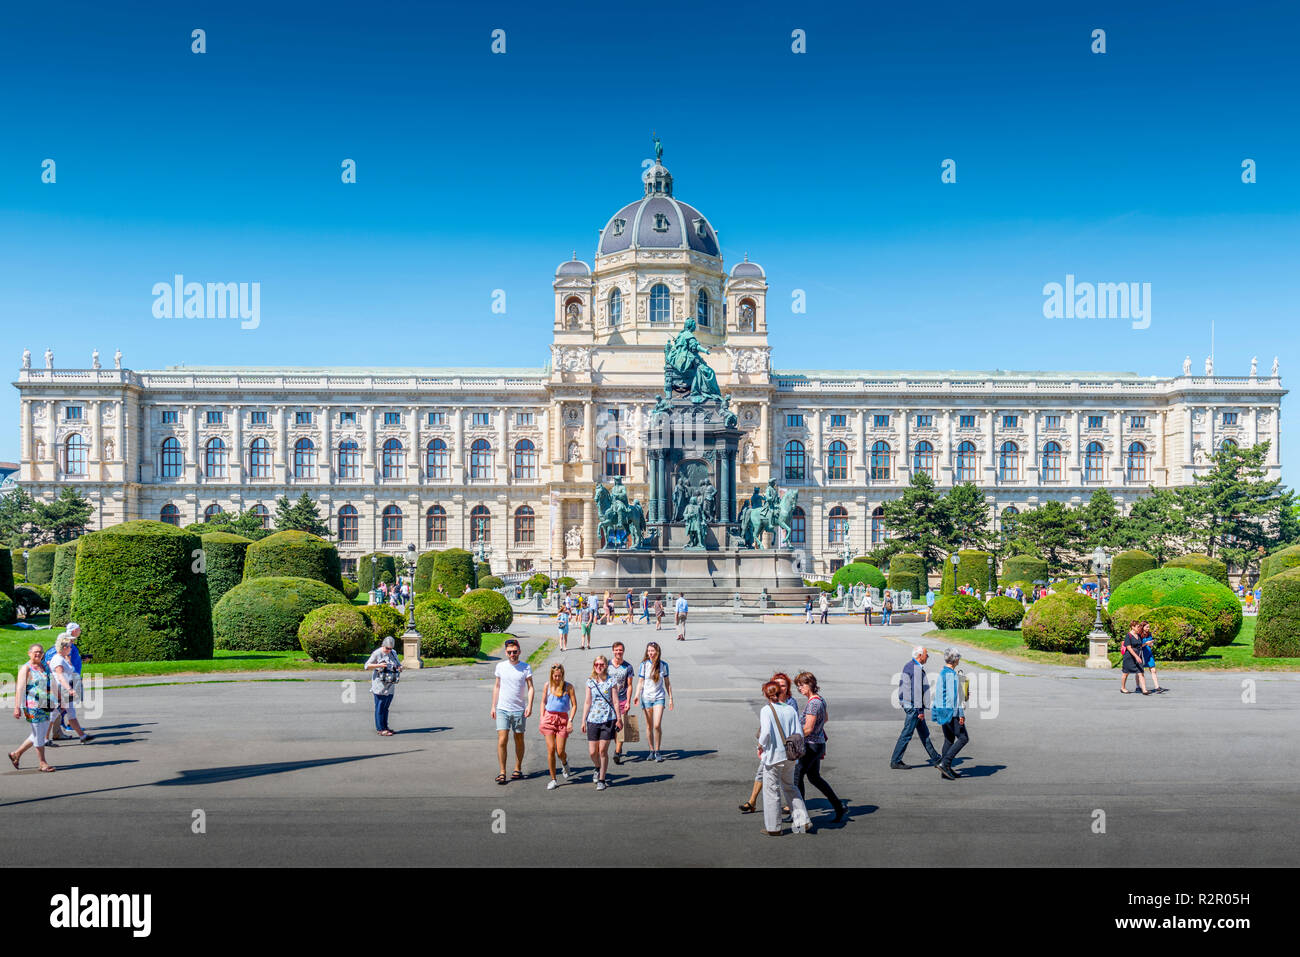 Europe, Austria, Vienna, Innere Stadt District, city centre, Marie-Theresien-Platz Square, Natural History Museum, Hofburg Palace Stock Photo